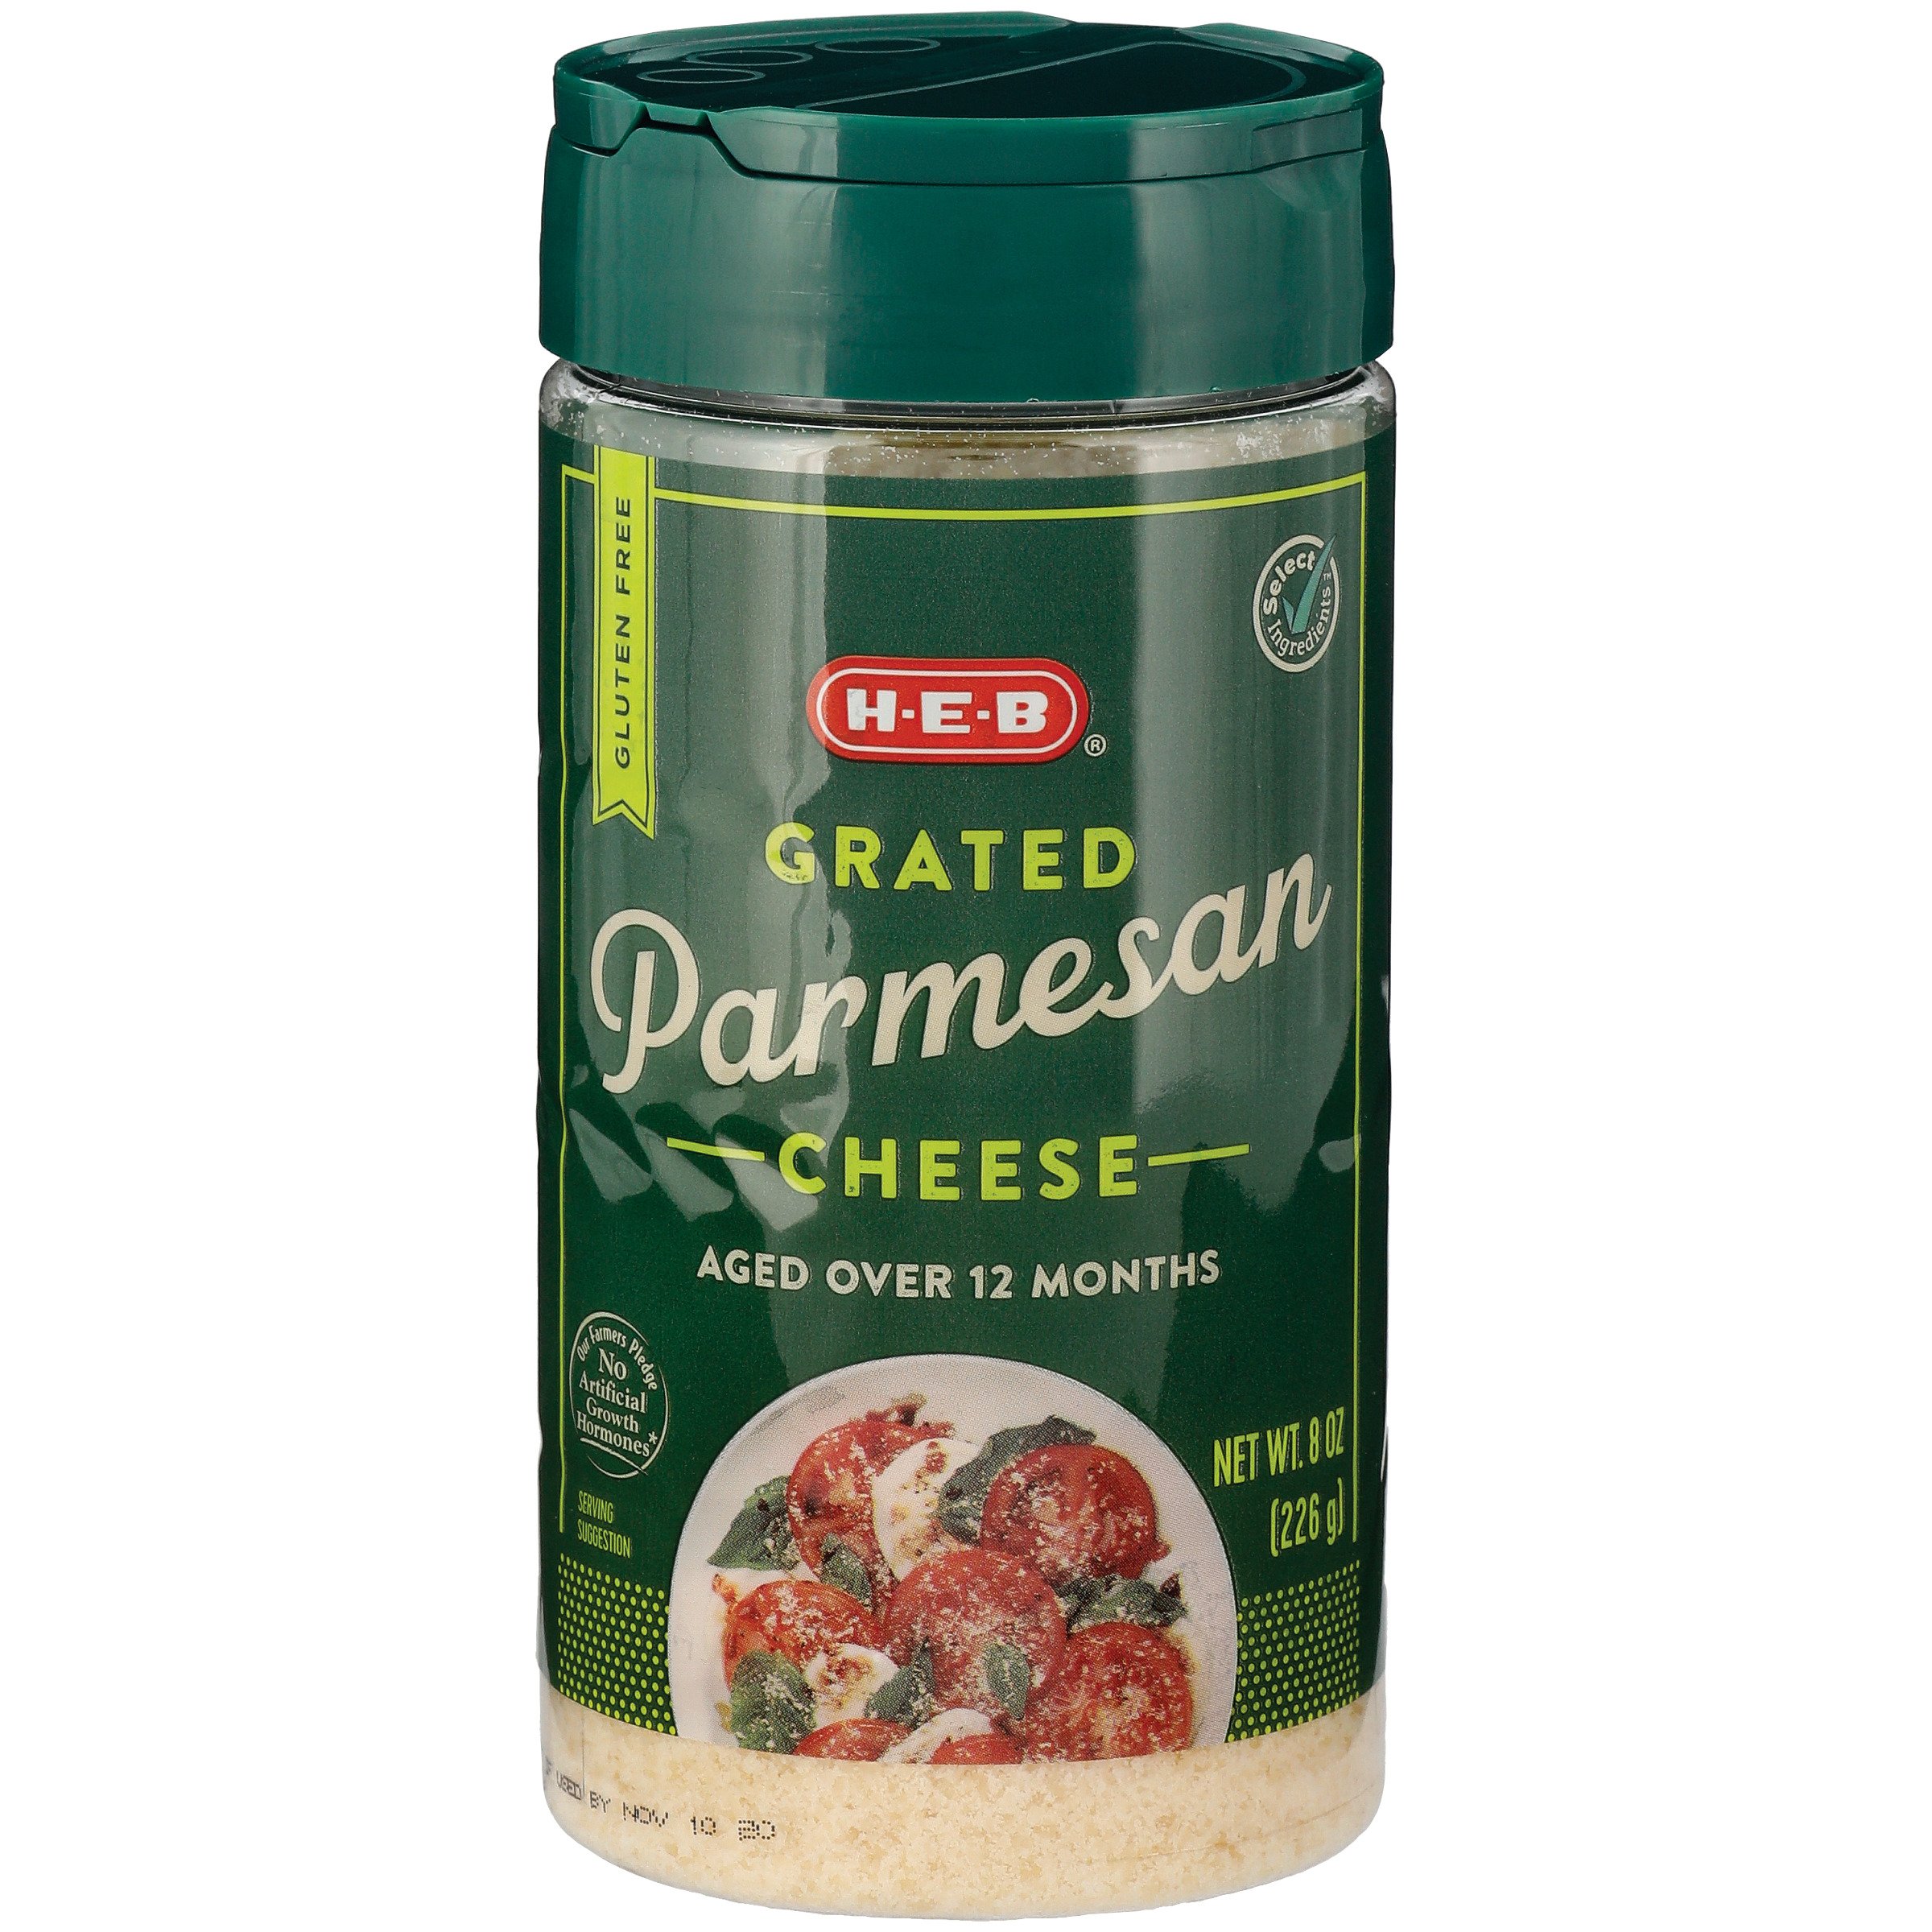 How to Buy the Best Quality Parmesan Cheese